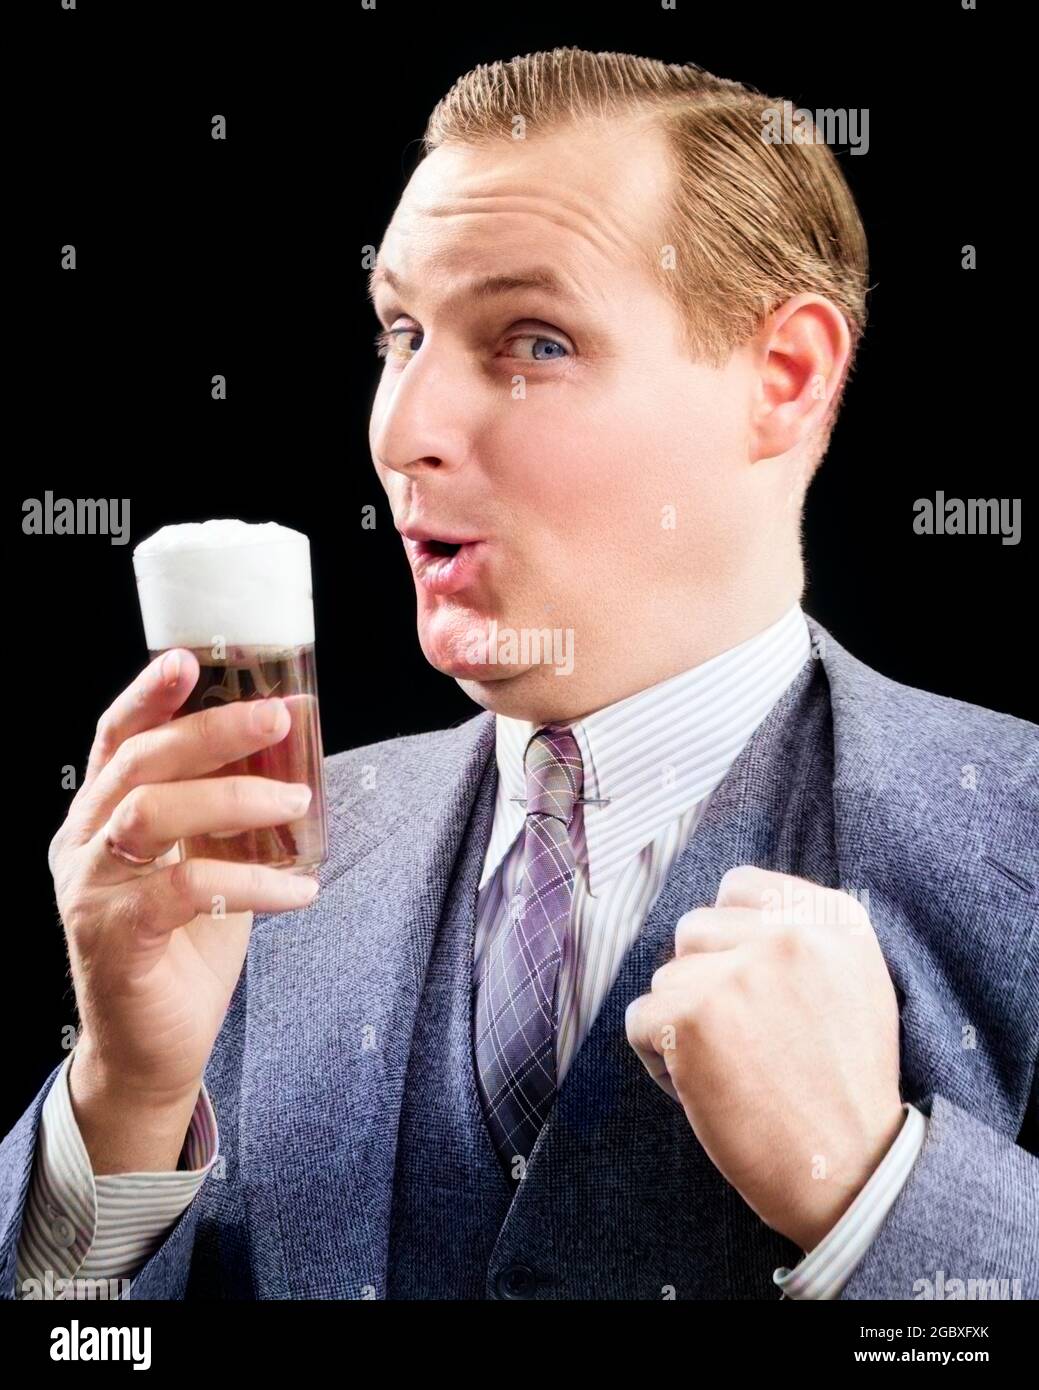 1930s MAN HOLDING FULL FOAMY GLASS OF BEER MAKING FUNNY FACE WITH HIS THUMB HOOKED CONFIDENTLY UNDER HIS VEST LOOKING AT CAMERA - f4377c HAR001 HARS STRIPED STUDIO SHOT GROWNUP COPY SPACE HALF-LENGTH PERSONS GROWN-UP MALES PLAID EXPRESSIONS EYE CONTACT SUIT AND TIE ALCOHOLIC HUMOROUS HAPPINESS CHEERFUL BEVERAGE TRIO PRIDE TASTE PLEASURE SMILES THREE PIECE JOYFUL NOURISHMENT STYLISH WACKY REFRESH FOAMY IMBIBING REFRESHMENT ALCOHOLIC BEVERAGE CAUCASIAN ETHNICITY HAR001 OLD FASHIONED Stock Photo